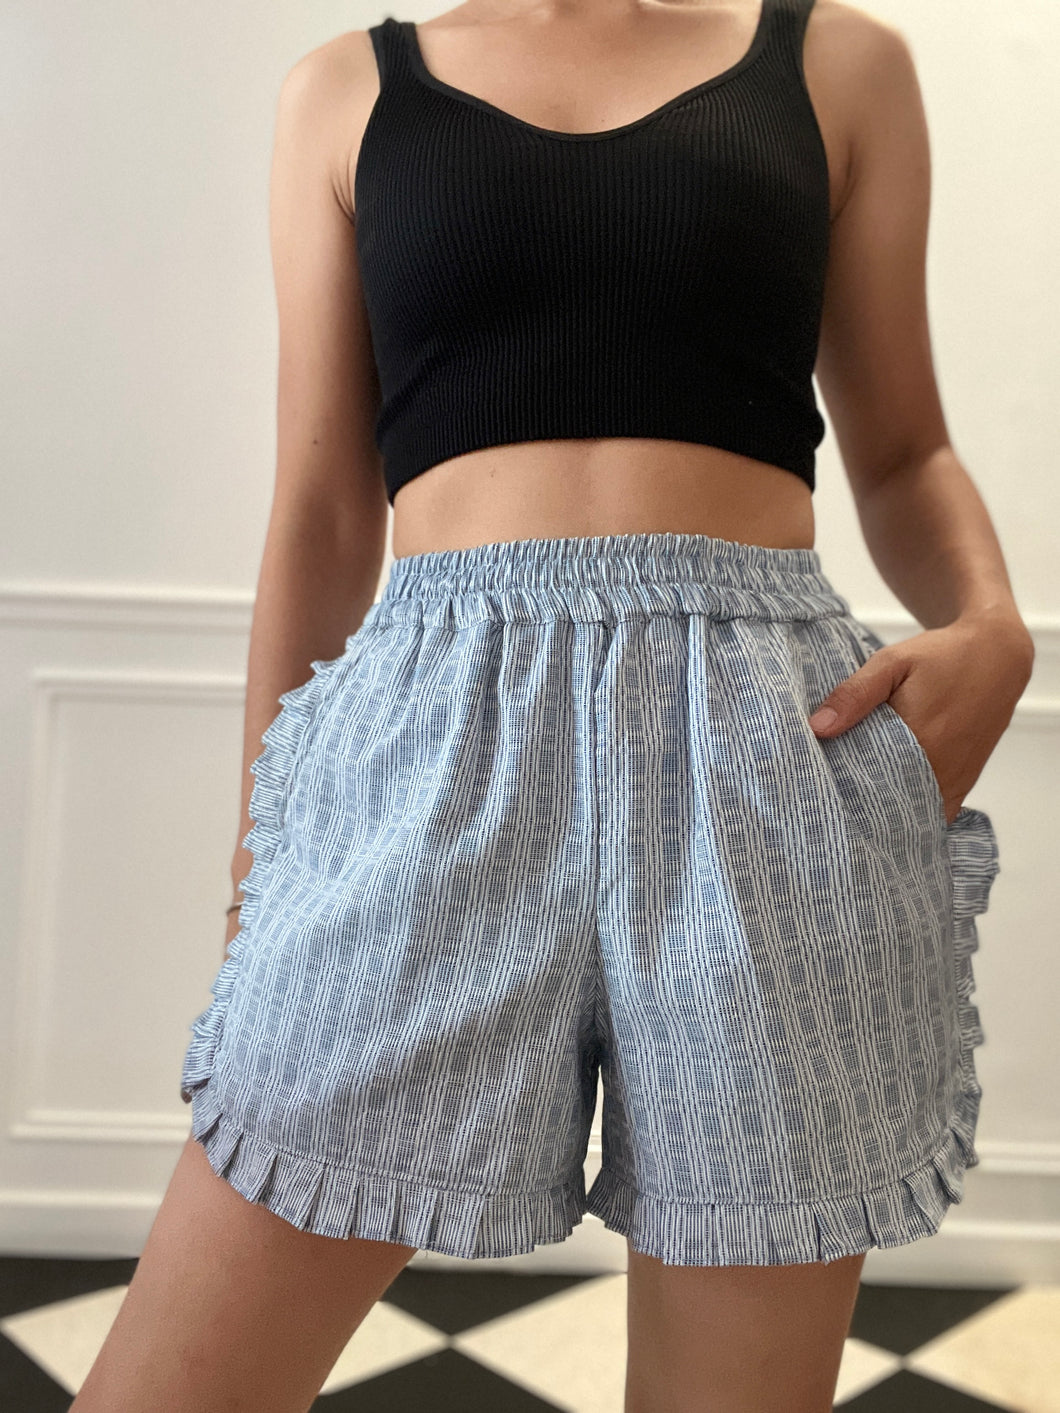 Mademoiselle shorts in light blue with ruffles